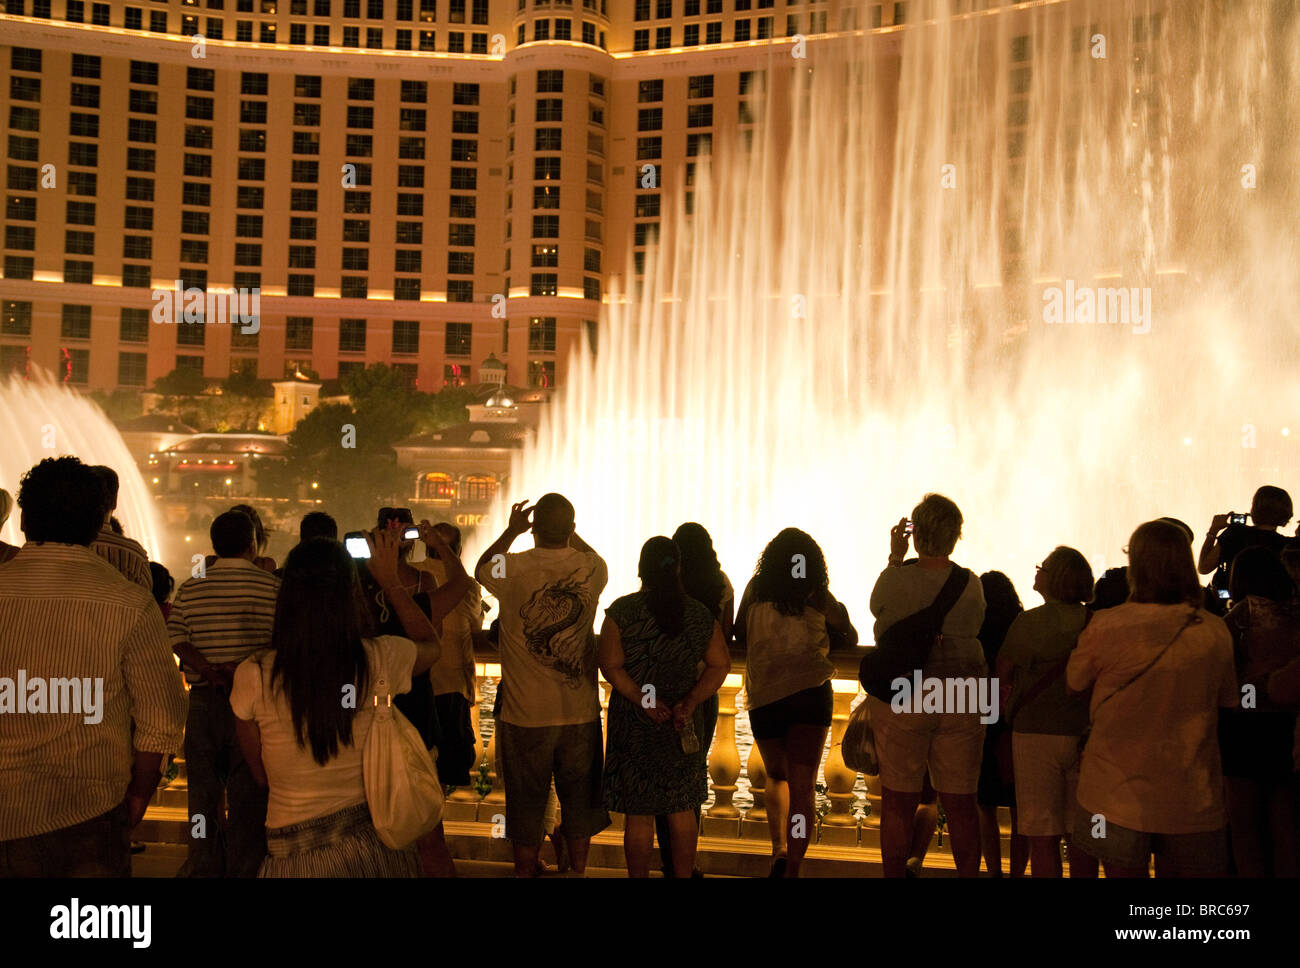 Searching for the Fountains of Bellagio – Travelcraft Journal